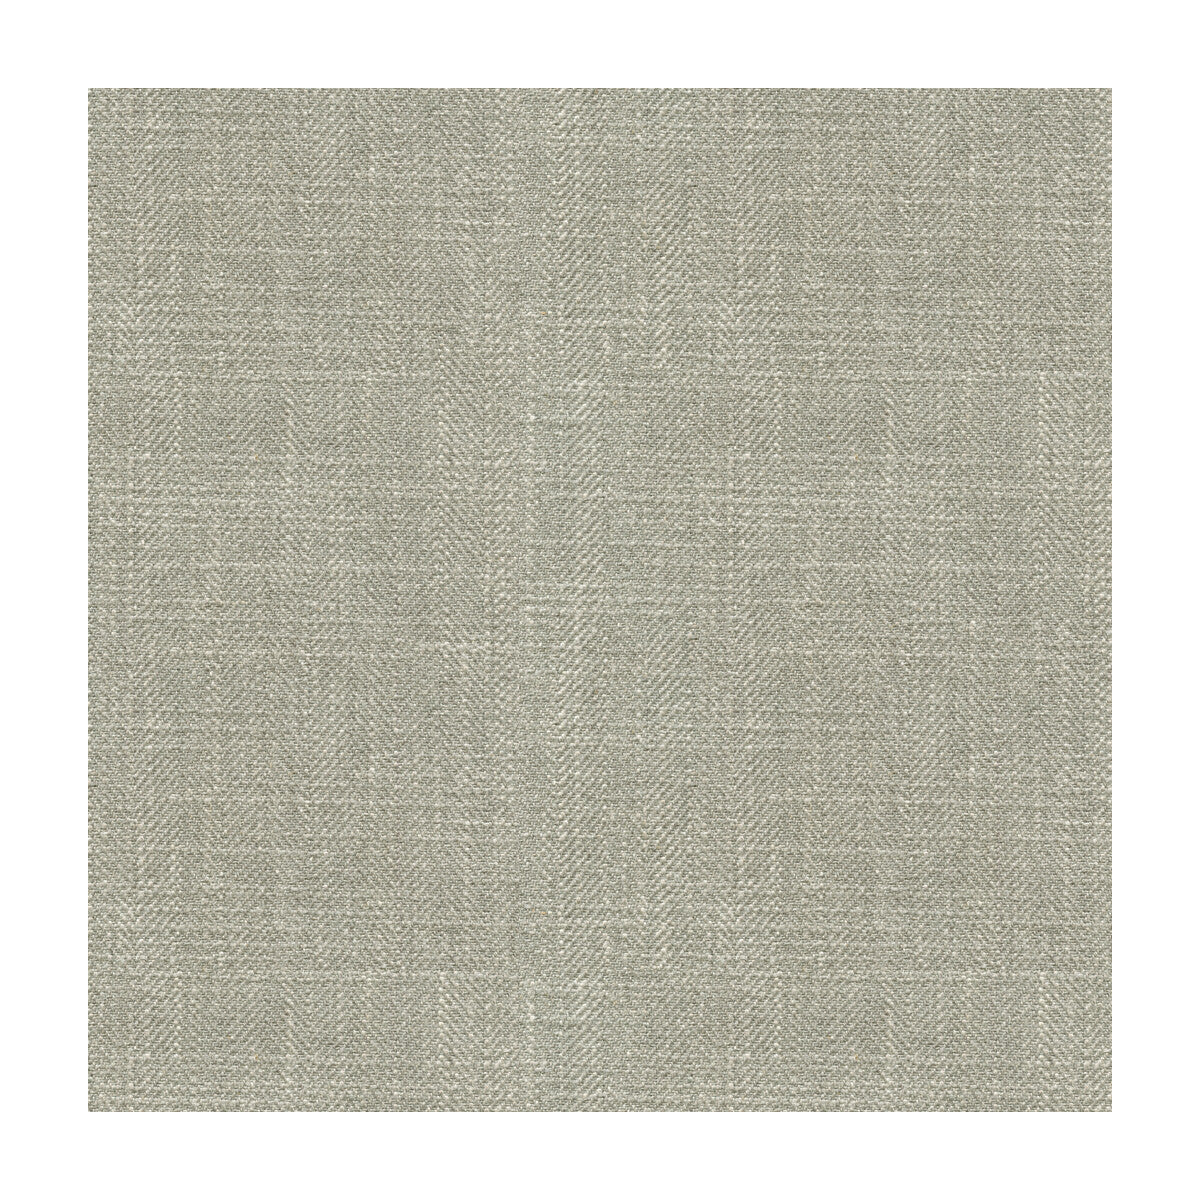 Kravet Basics fabric in 33842-11 color - pattern 33842.11.0 - by Kravet Basics in the Perfect Plains collection